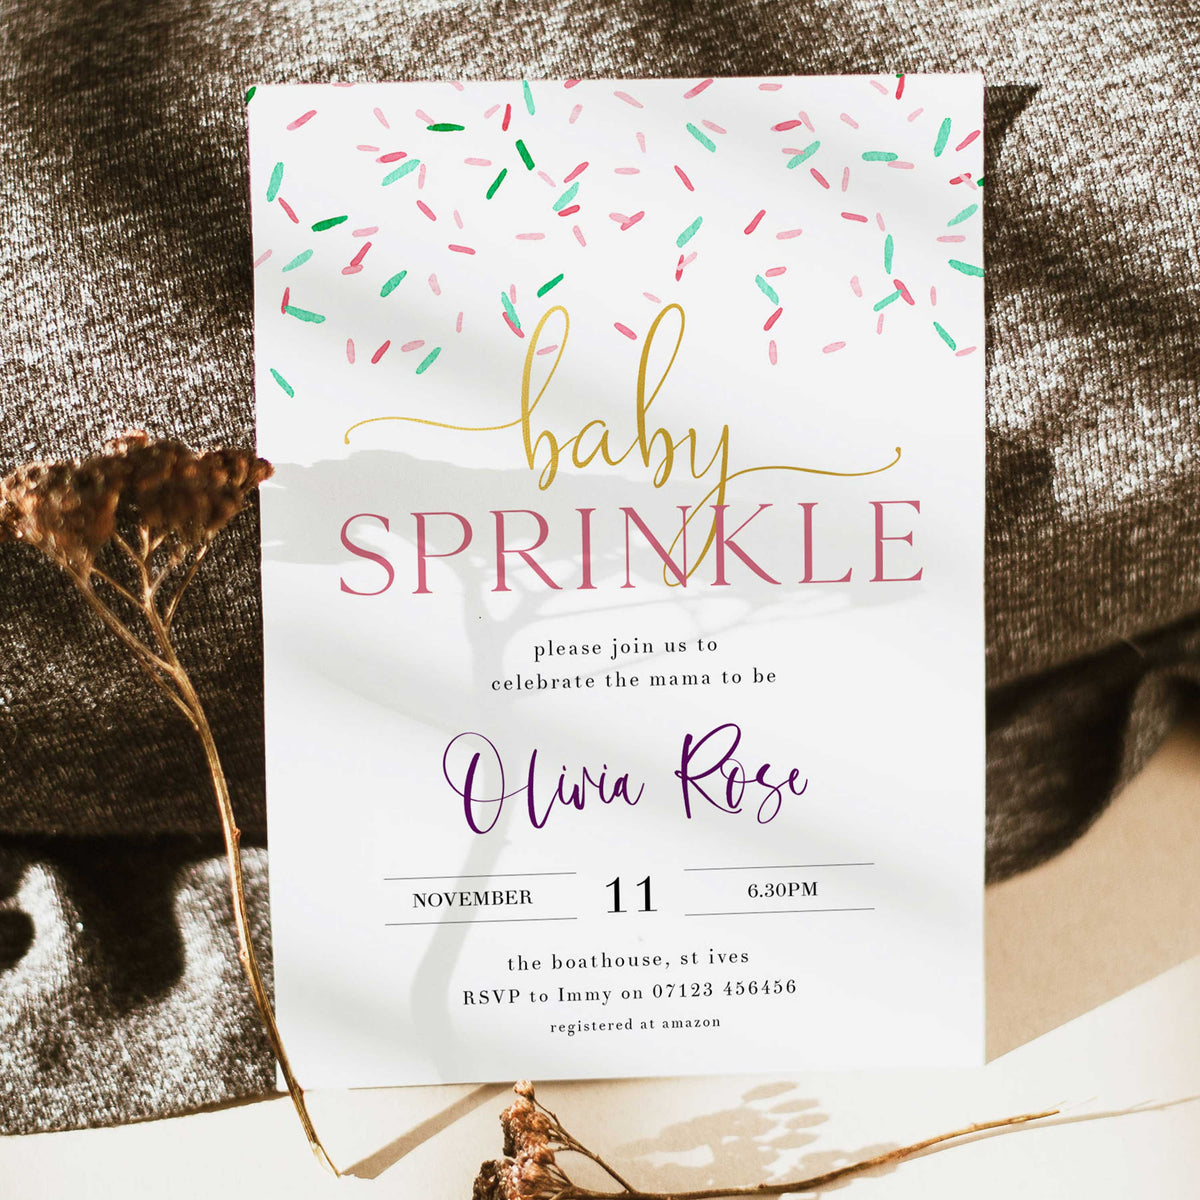 baby sprinkle baby shower invitations, printable baby shower invitations, editable baby shower invitations, mobile baby shower invitations, baby sprinkle theme